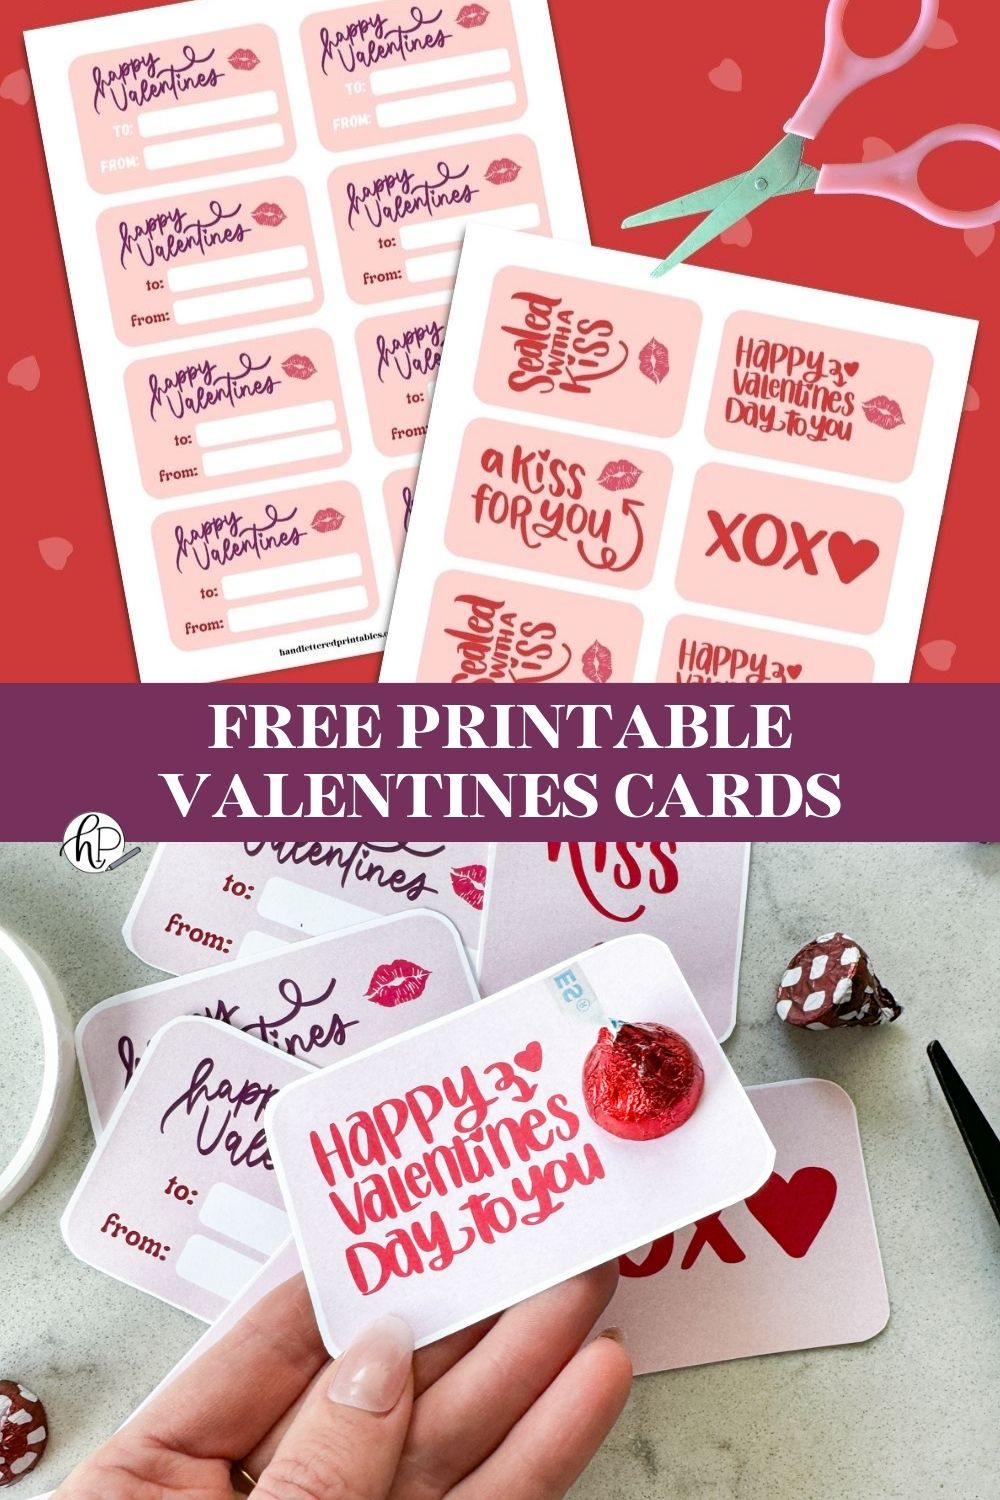 text reads free printable valentines cards, top image of printed valentines cards on red background with scissors, bottom image of printed valentine cut to size with hersheys kiss